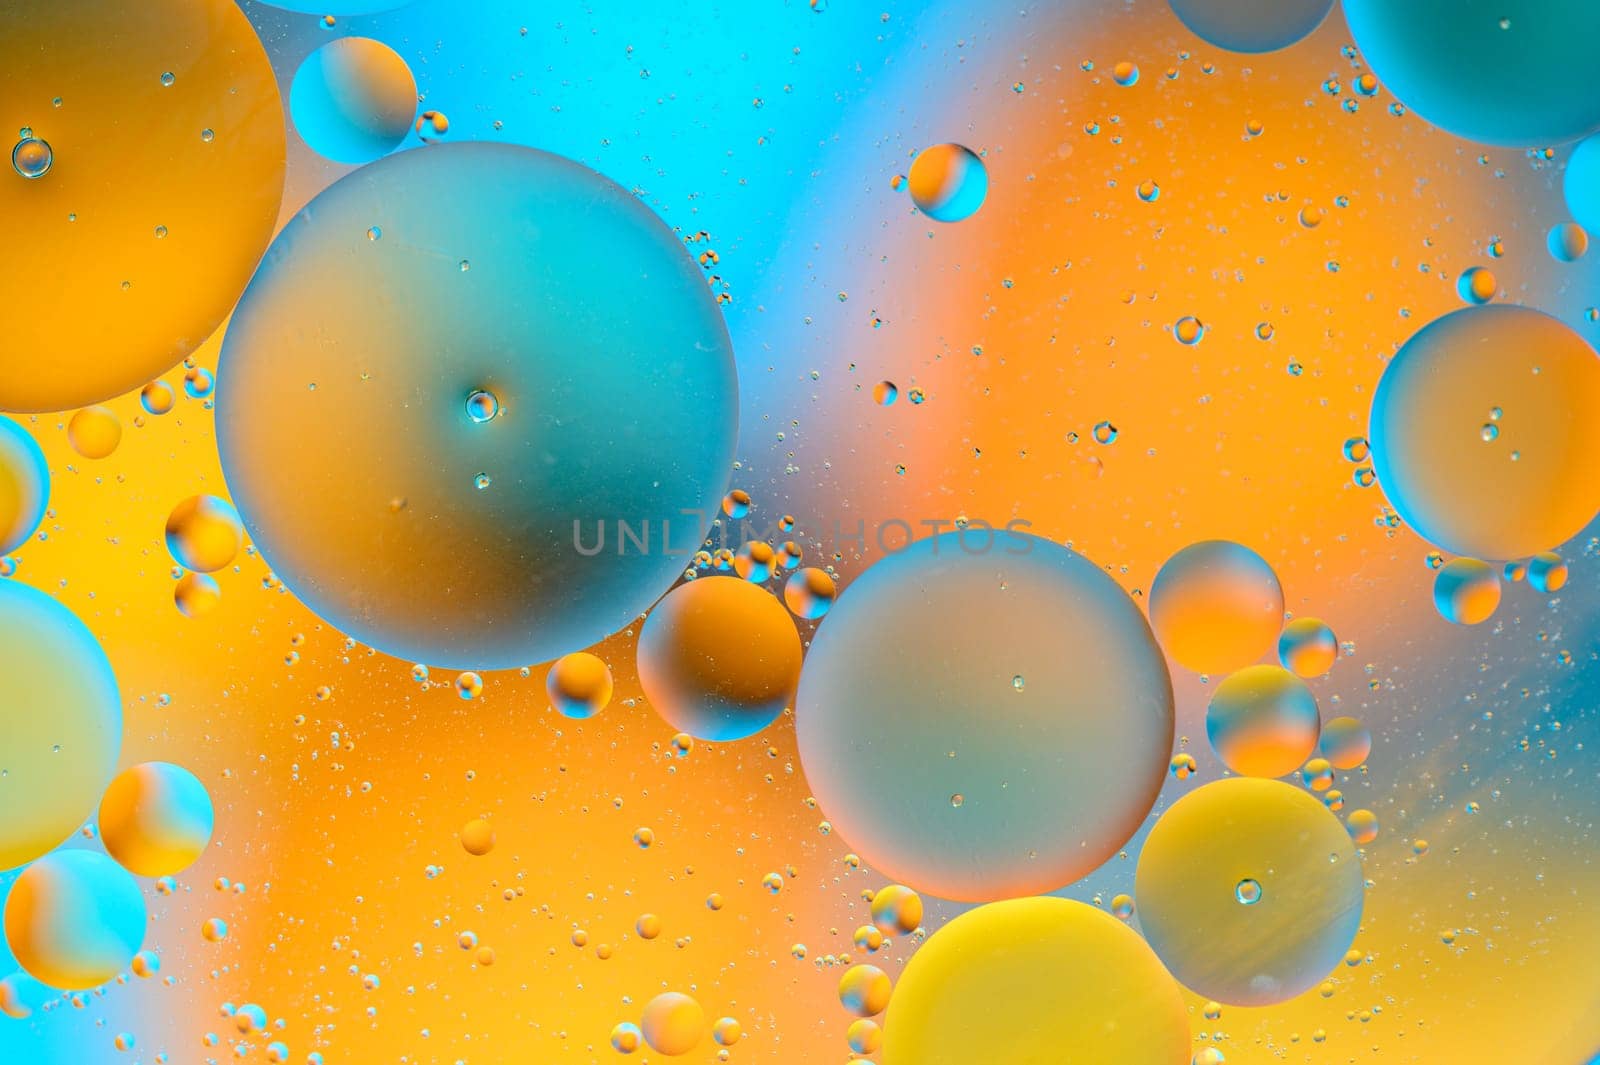 abstract background of multi-colored spots and circles microcosm universe galaxy 17 by Mixa74